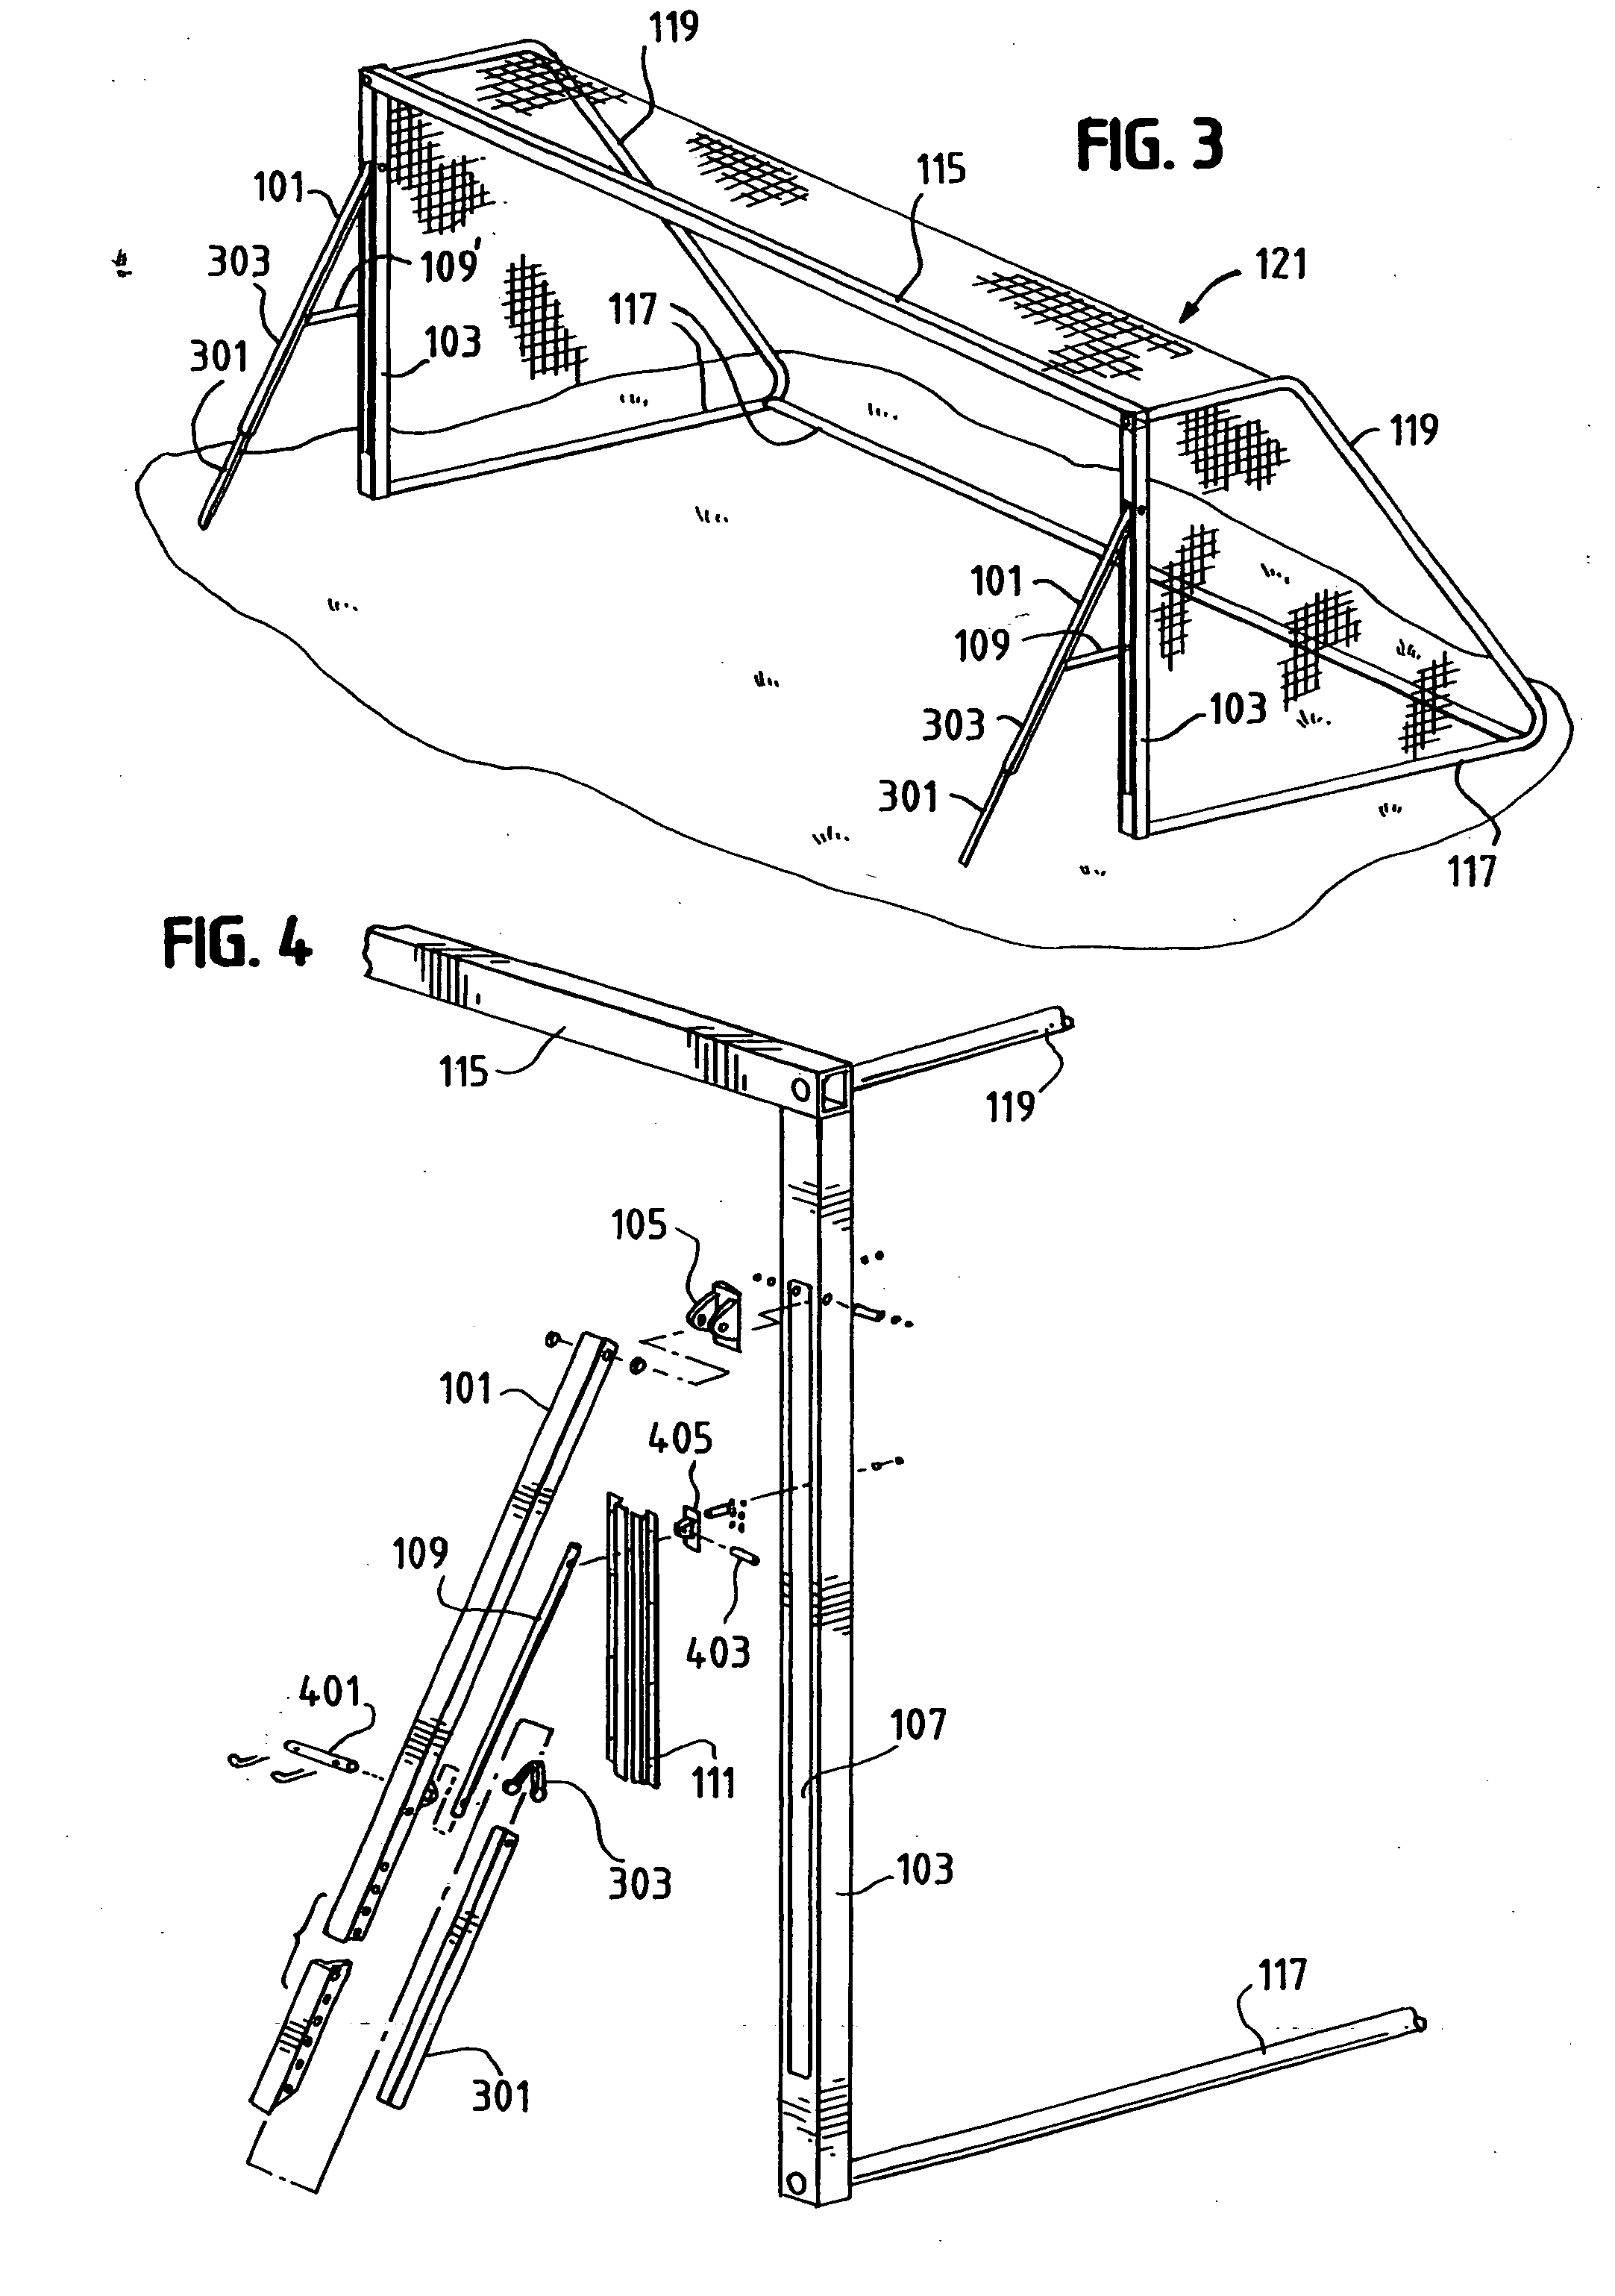 Apparatus for supporting a goal upright